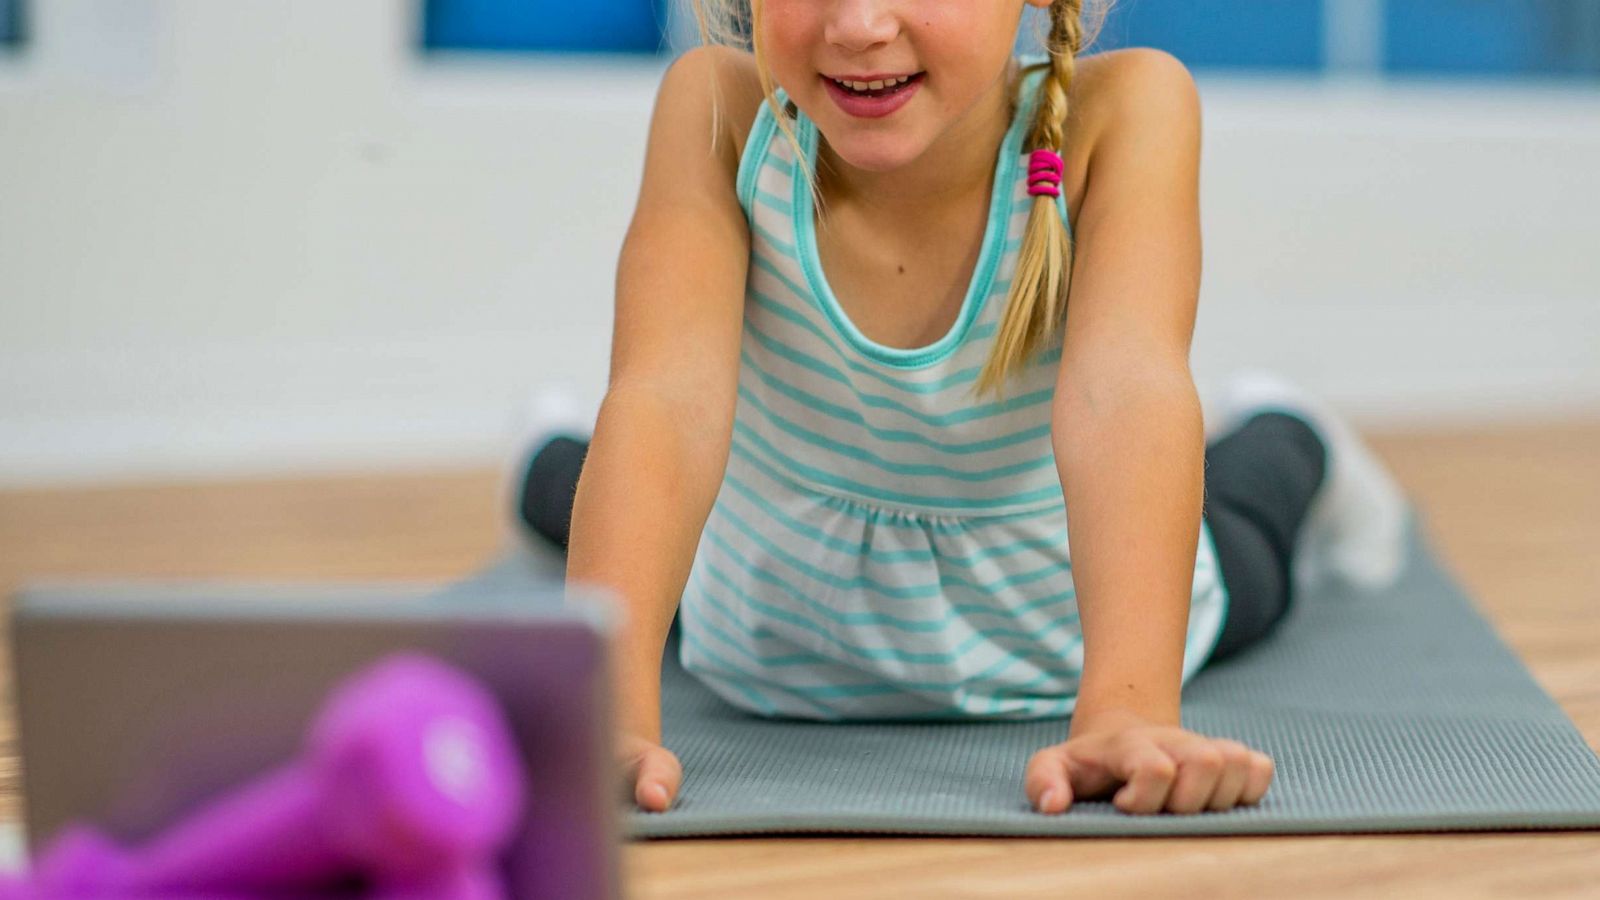 PHOTO: An elementary age girl appears to be doing yoga on an exercise mat.